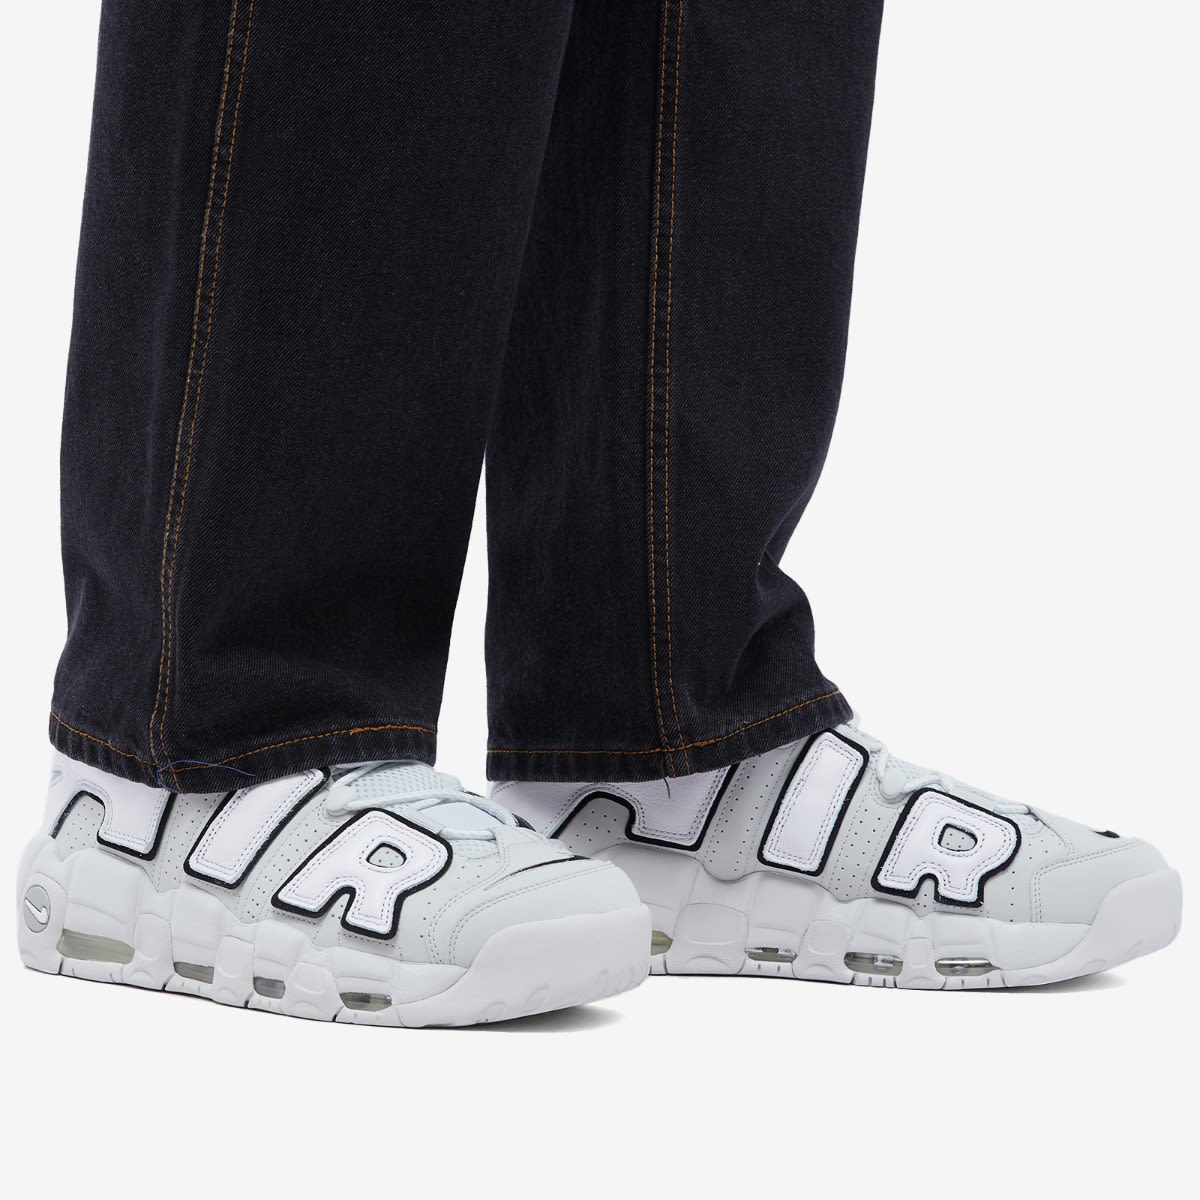 Nike Air More Uptempo '96 "Photon Dust"